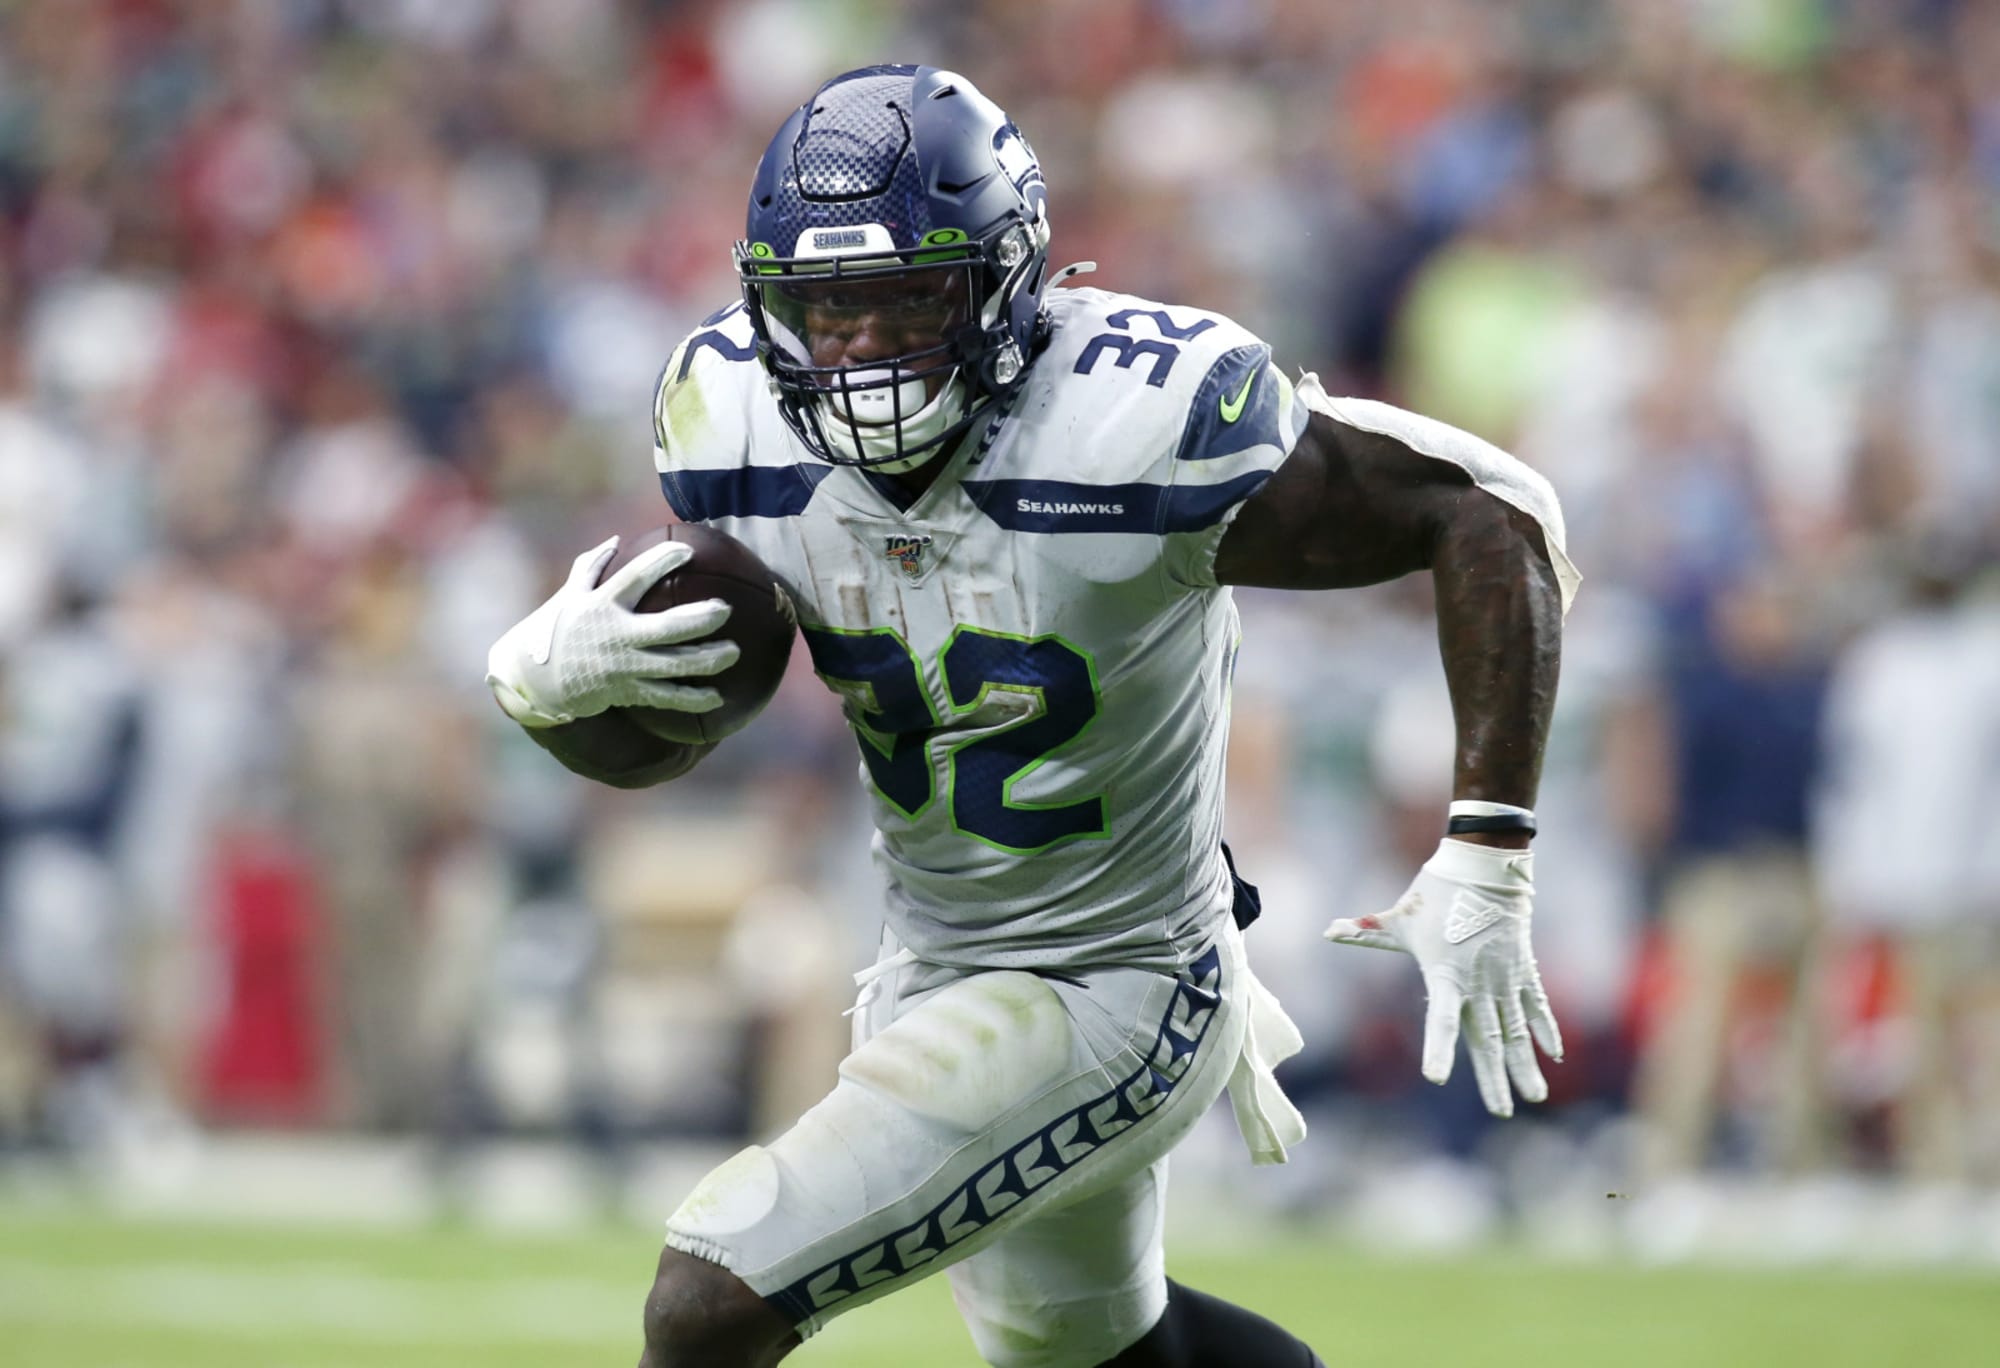 4 eye-popping statistics about Seahawks RB Chris Carson